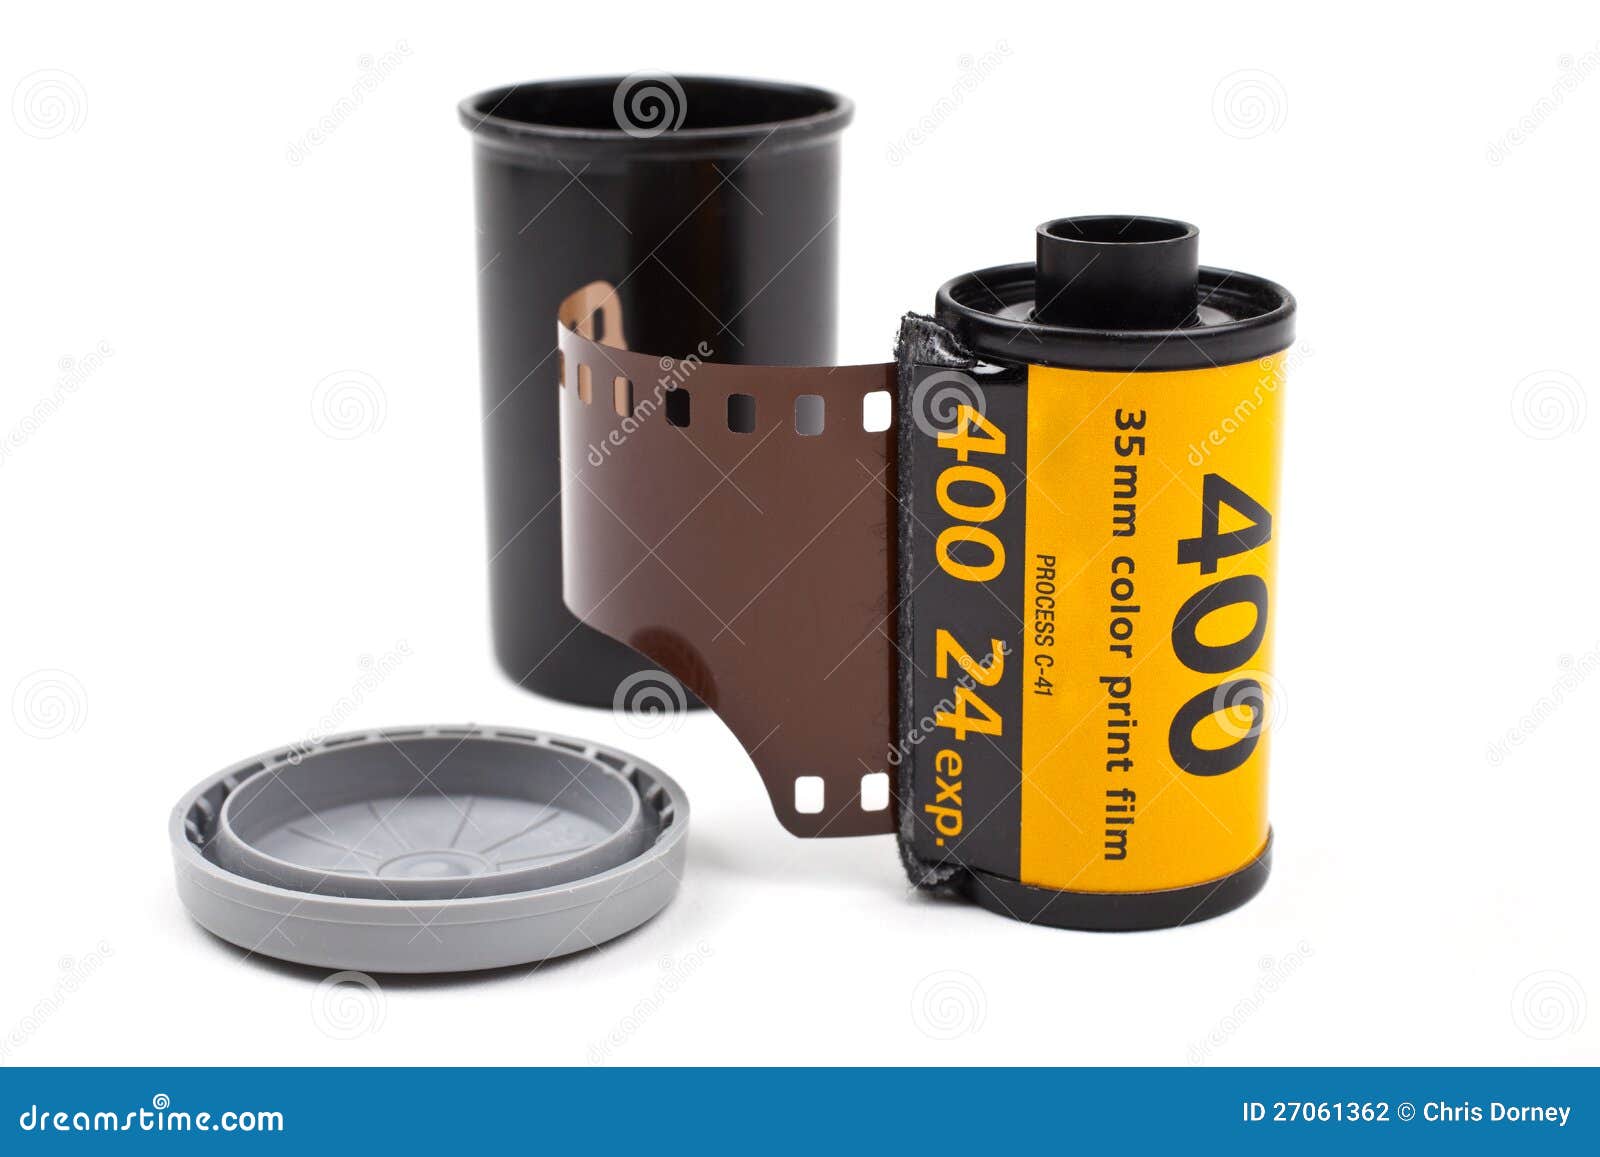 https://thumbs.dreamstime.com/z/roll-photographic-film-27061362.jpg